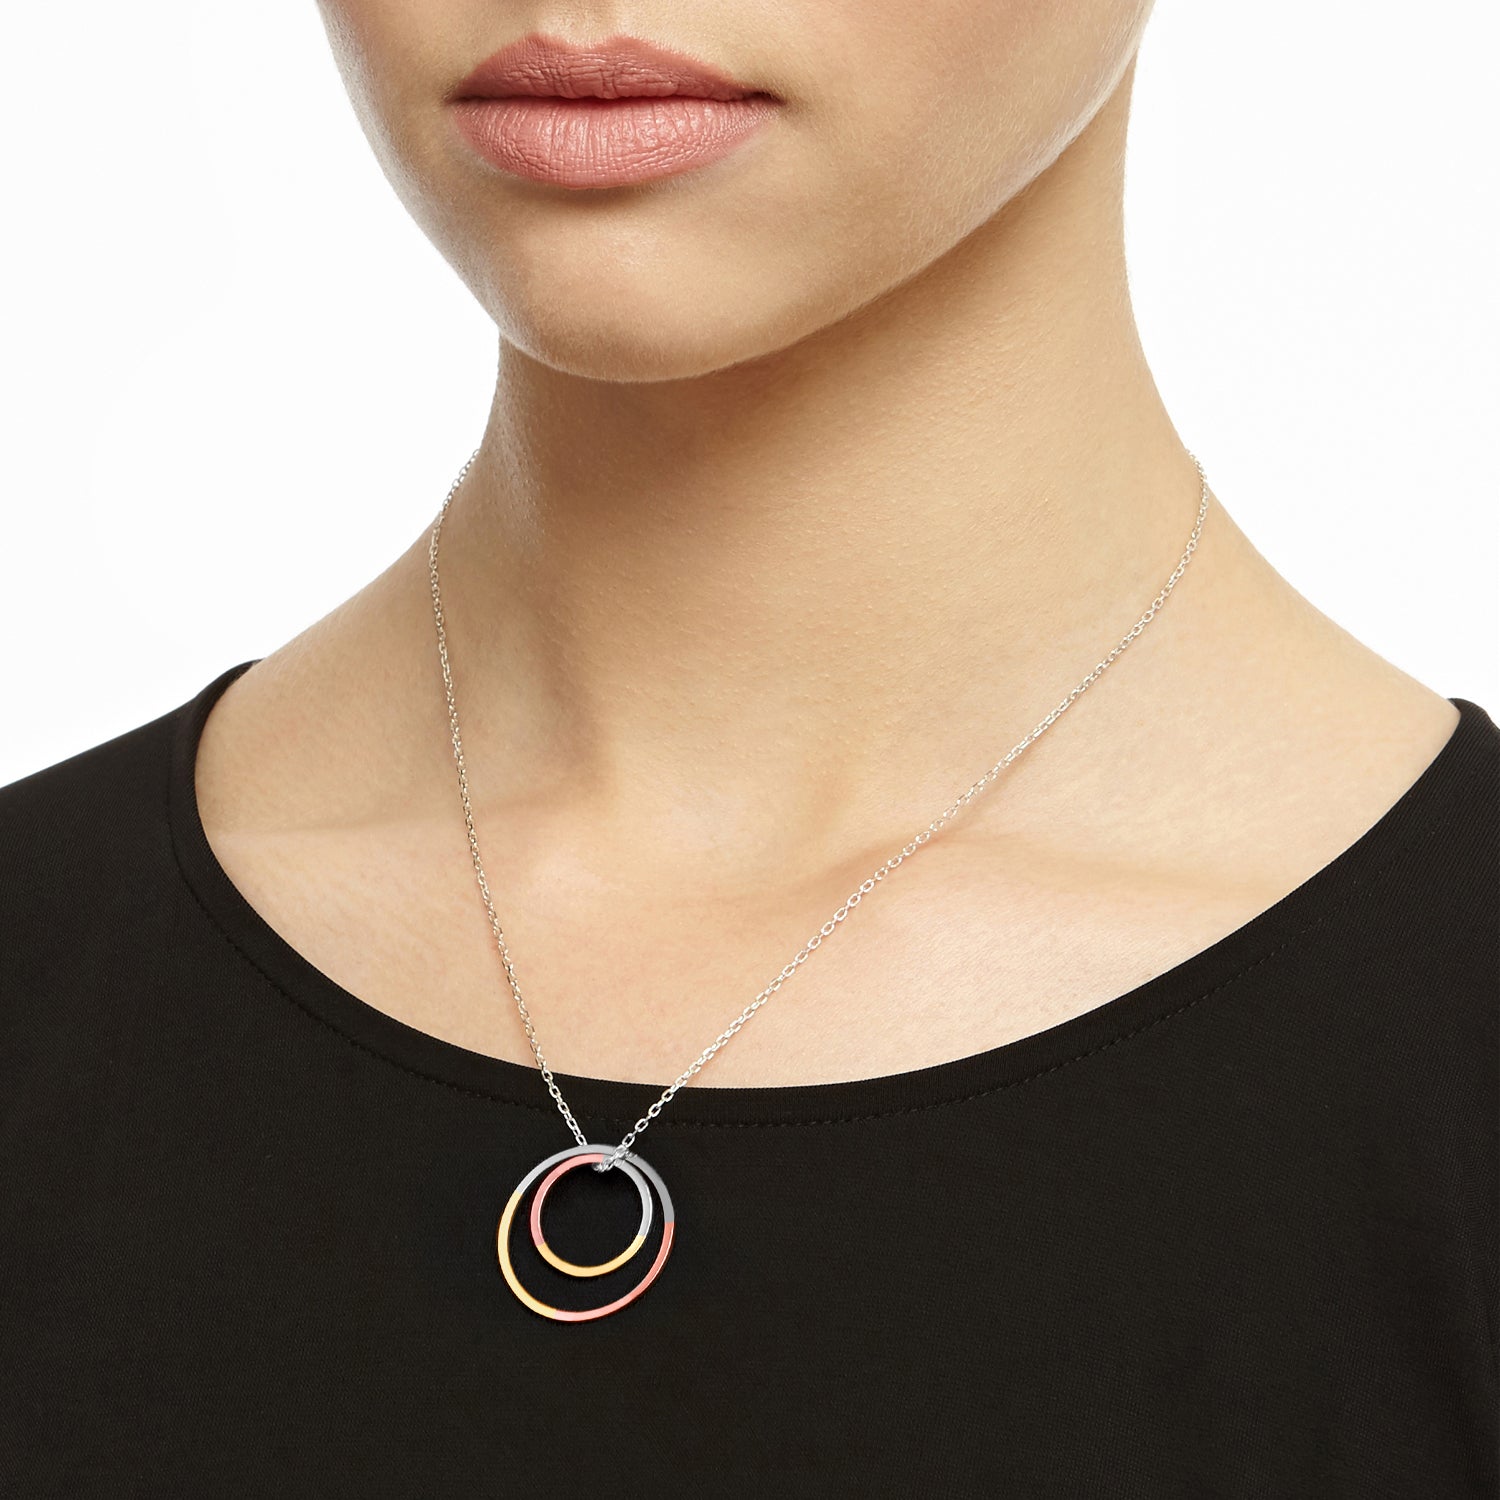 Three-Tone Double Circle Necklace - 9k Yellow & Rose Gold & Silver